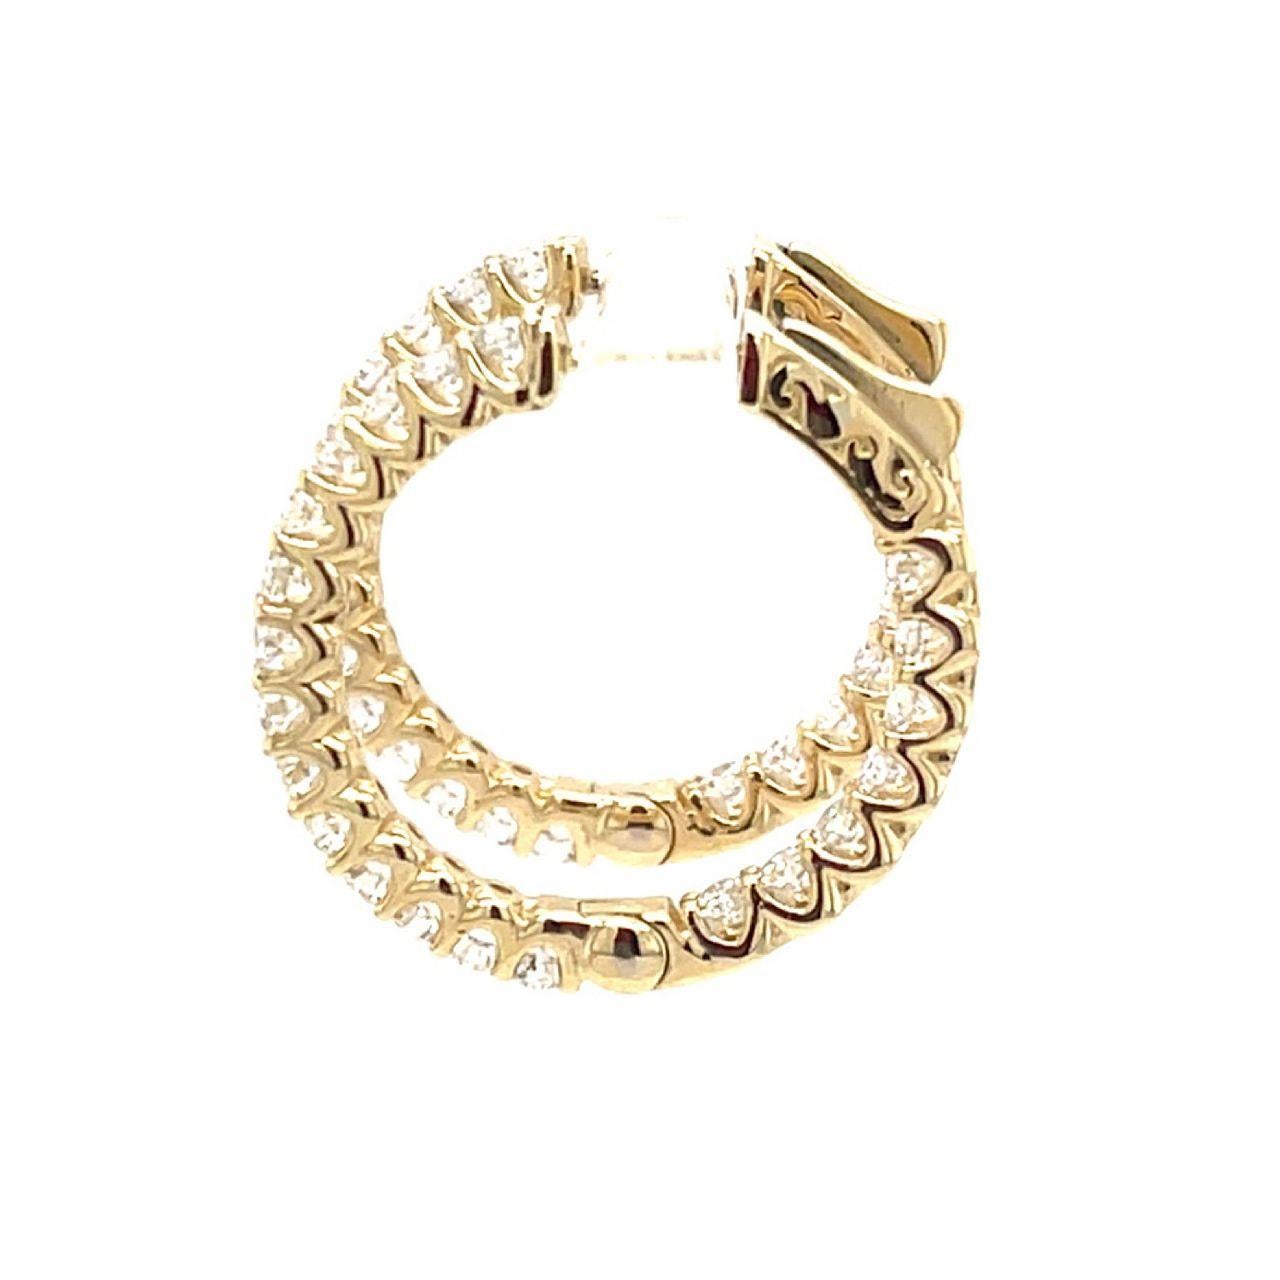 Round Cut 3.42 Carats Diamond Hoop Earrings in 14k Yellow Gold For Sale